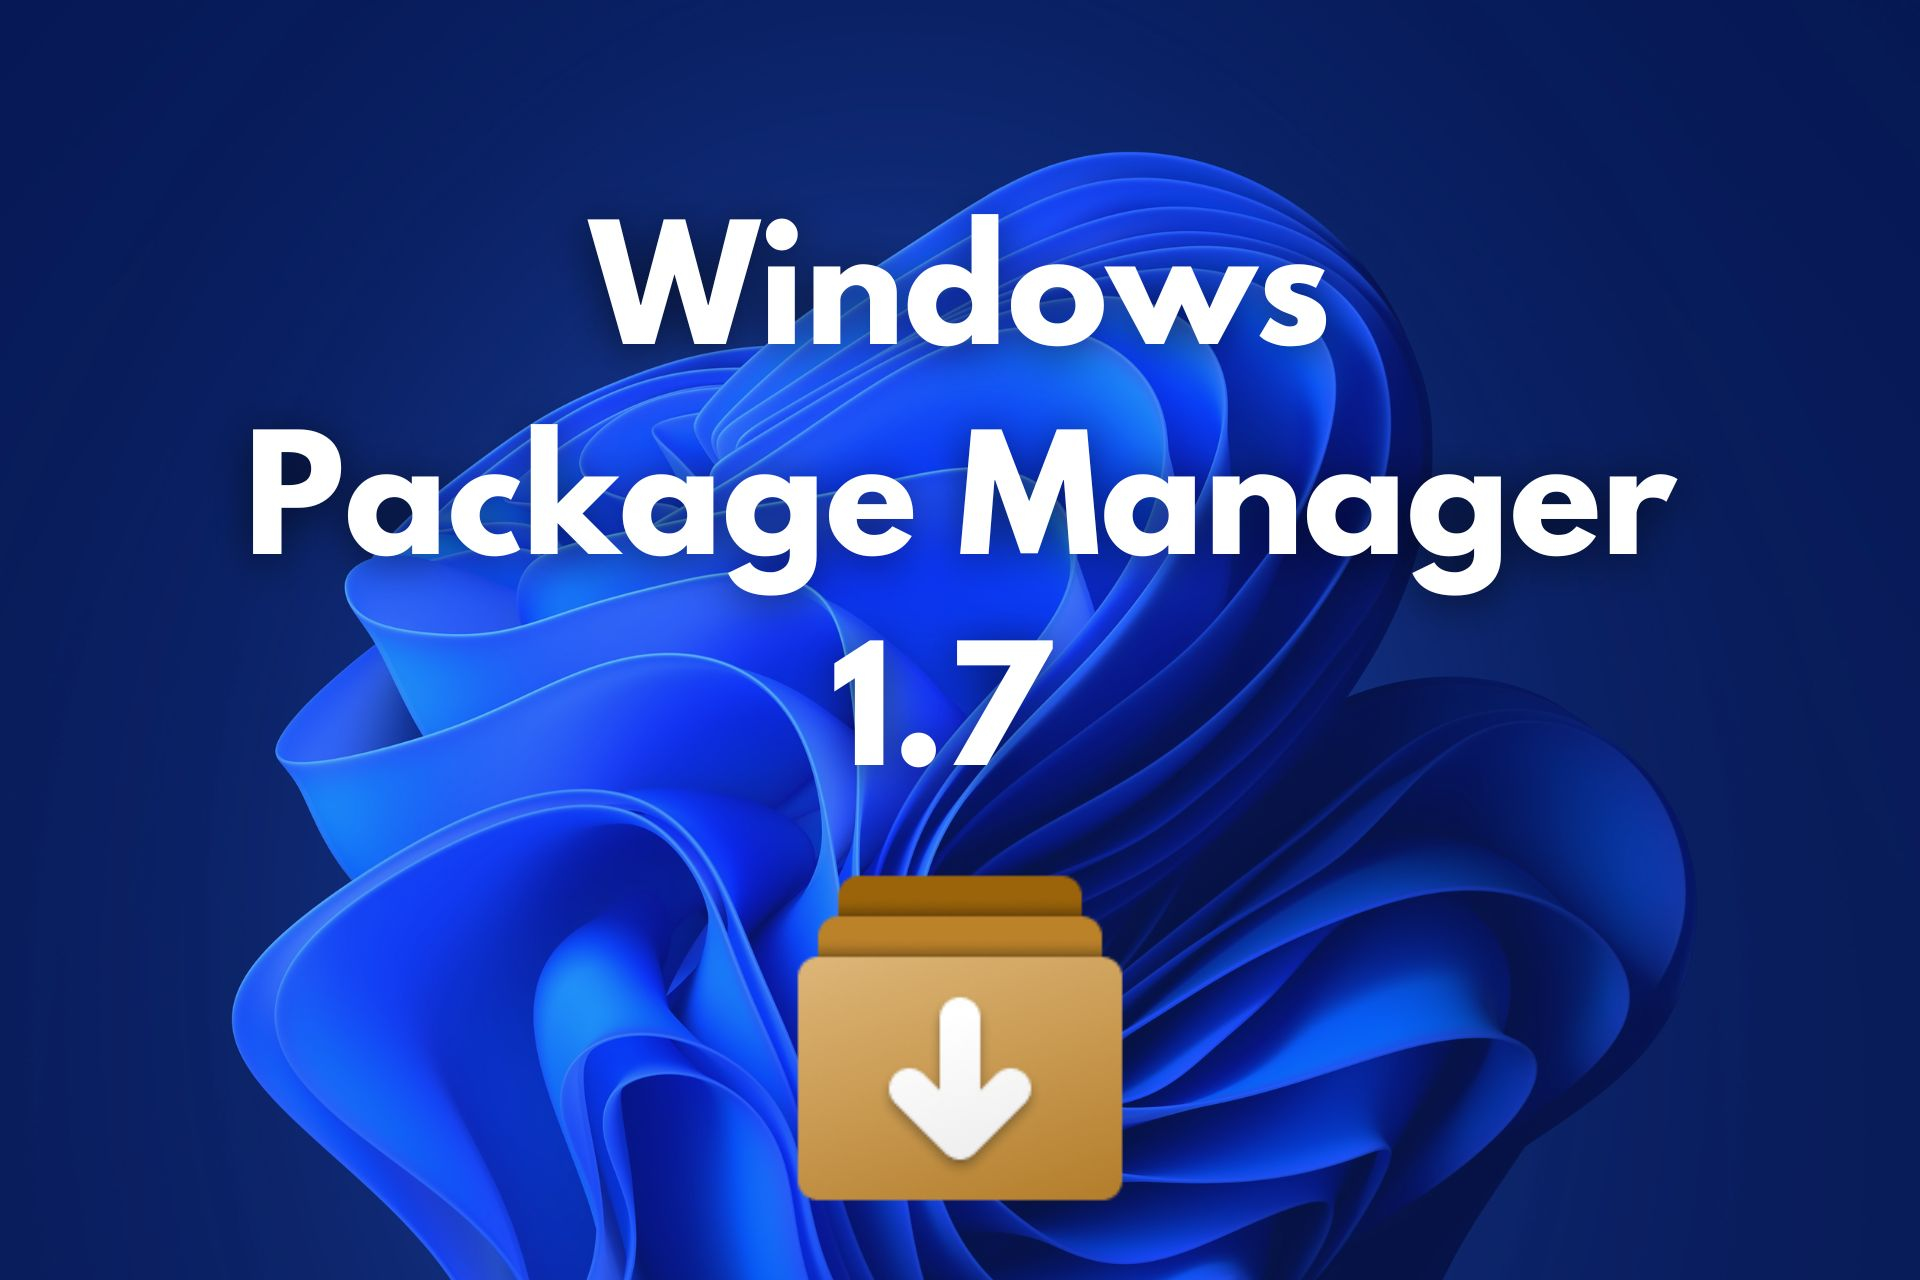 Windows Package Manager version 1.7 featured next to the WinGet logo